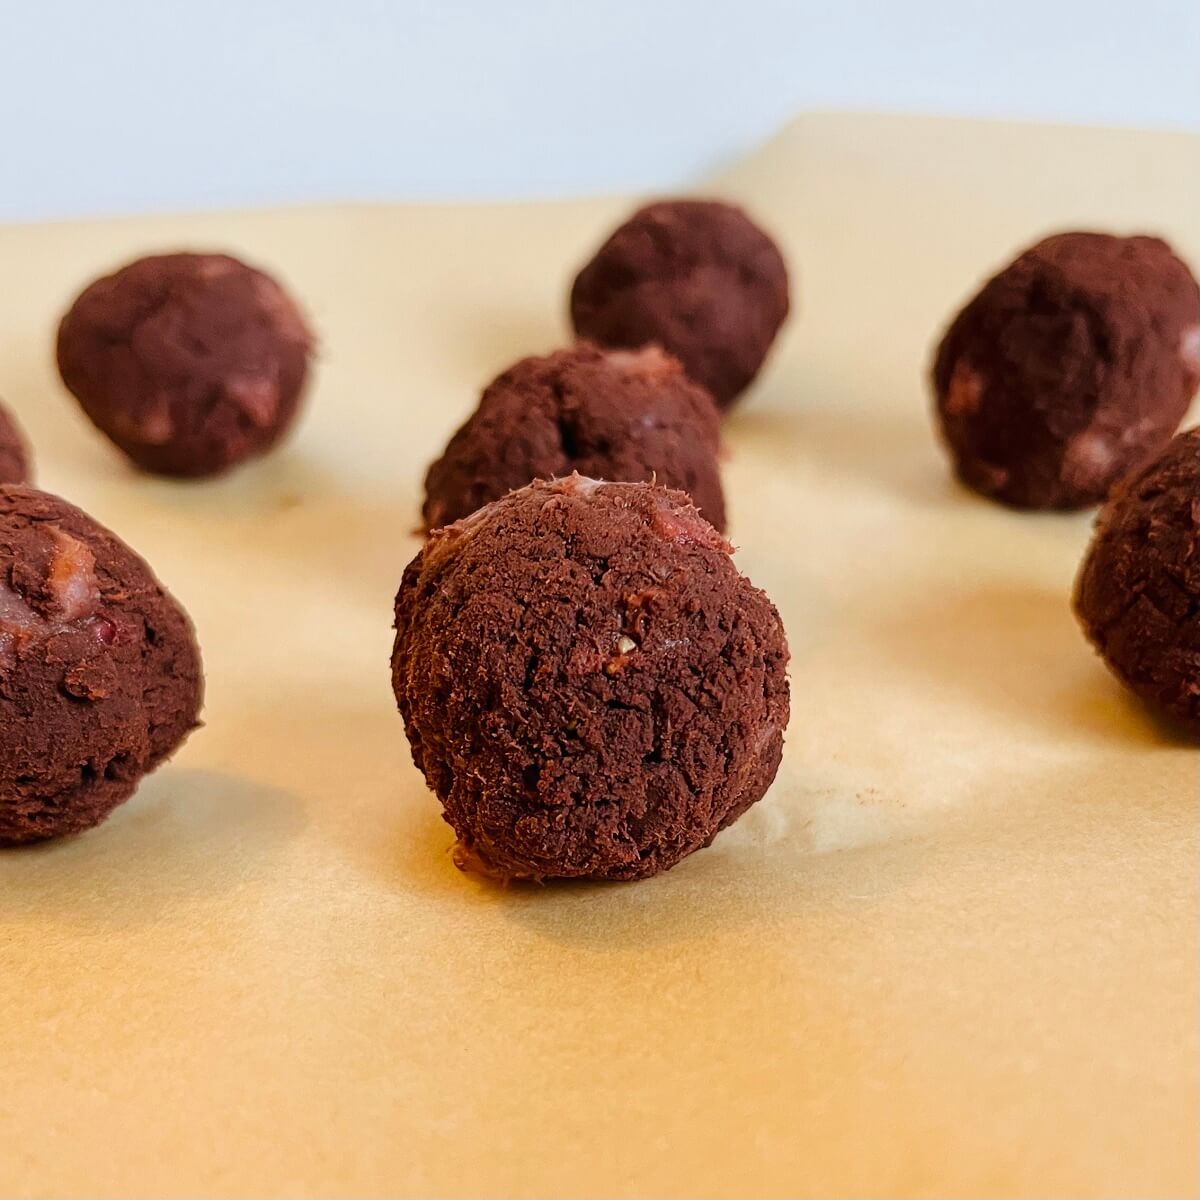 Strawberry chocolate balls on a piece of parchment paper.